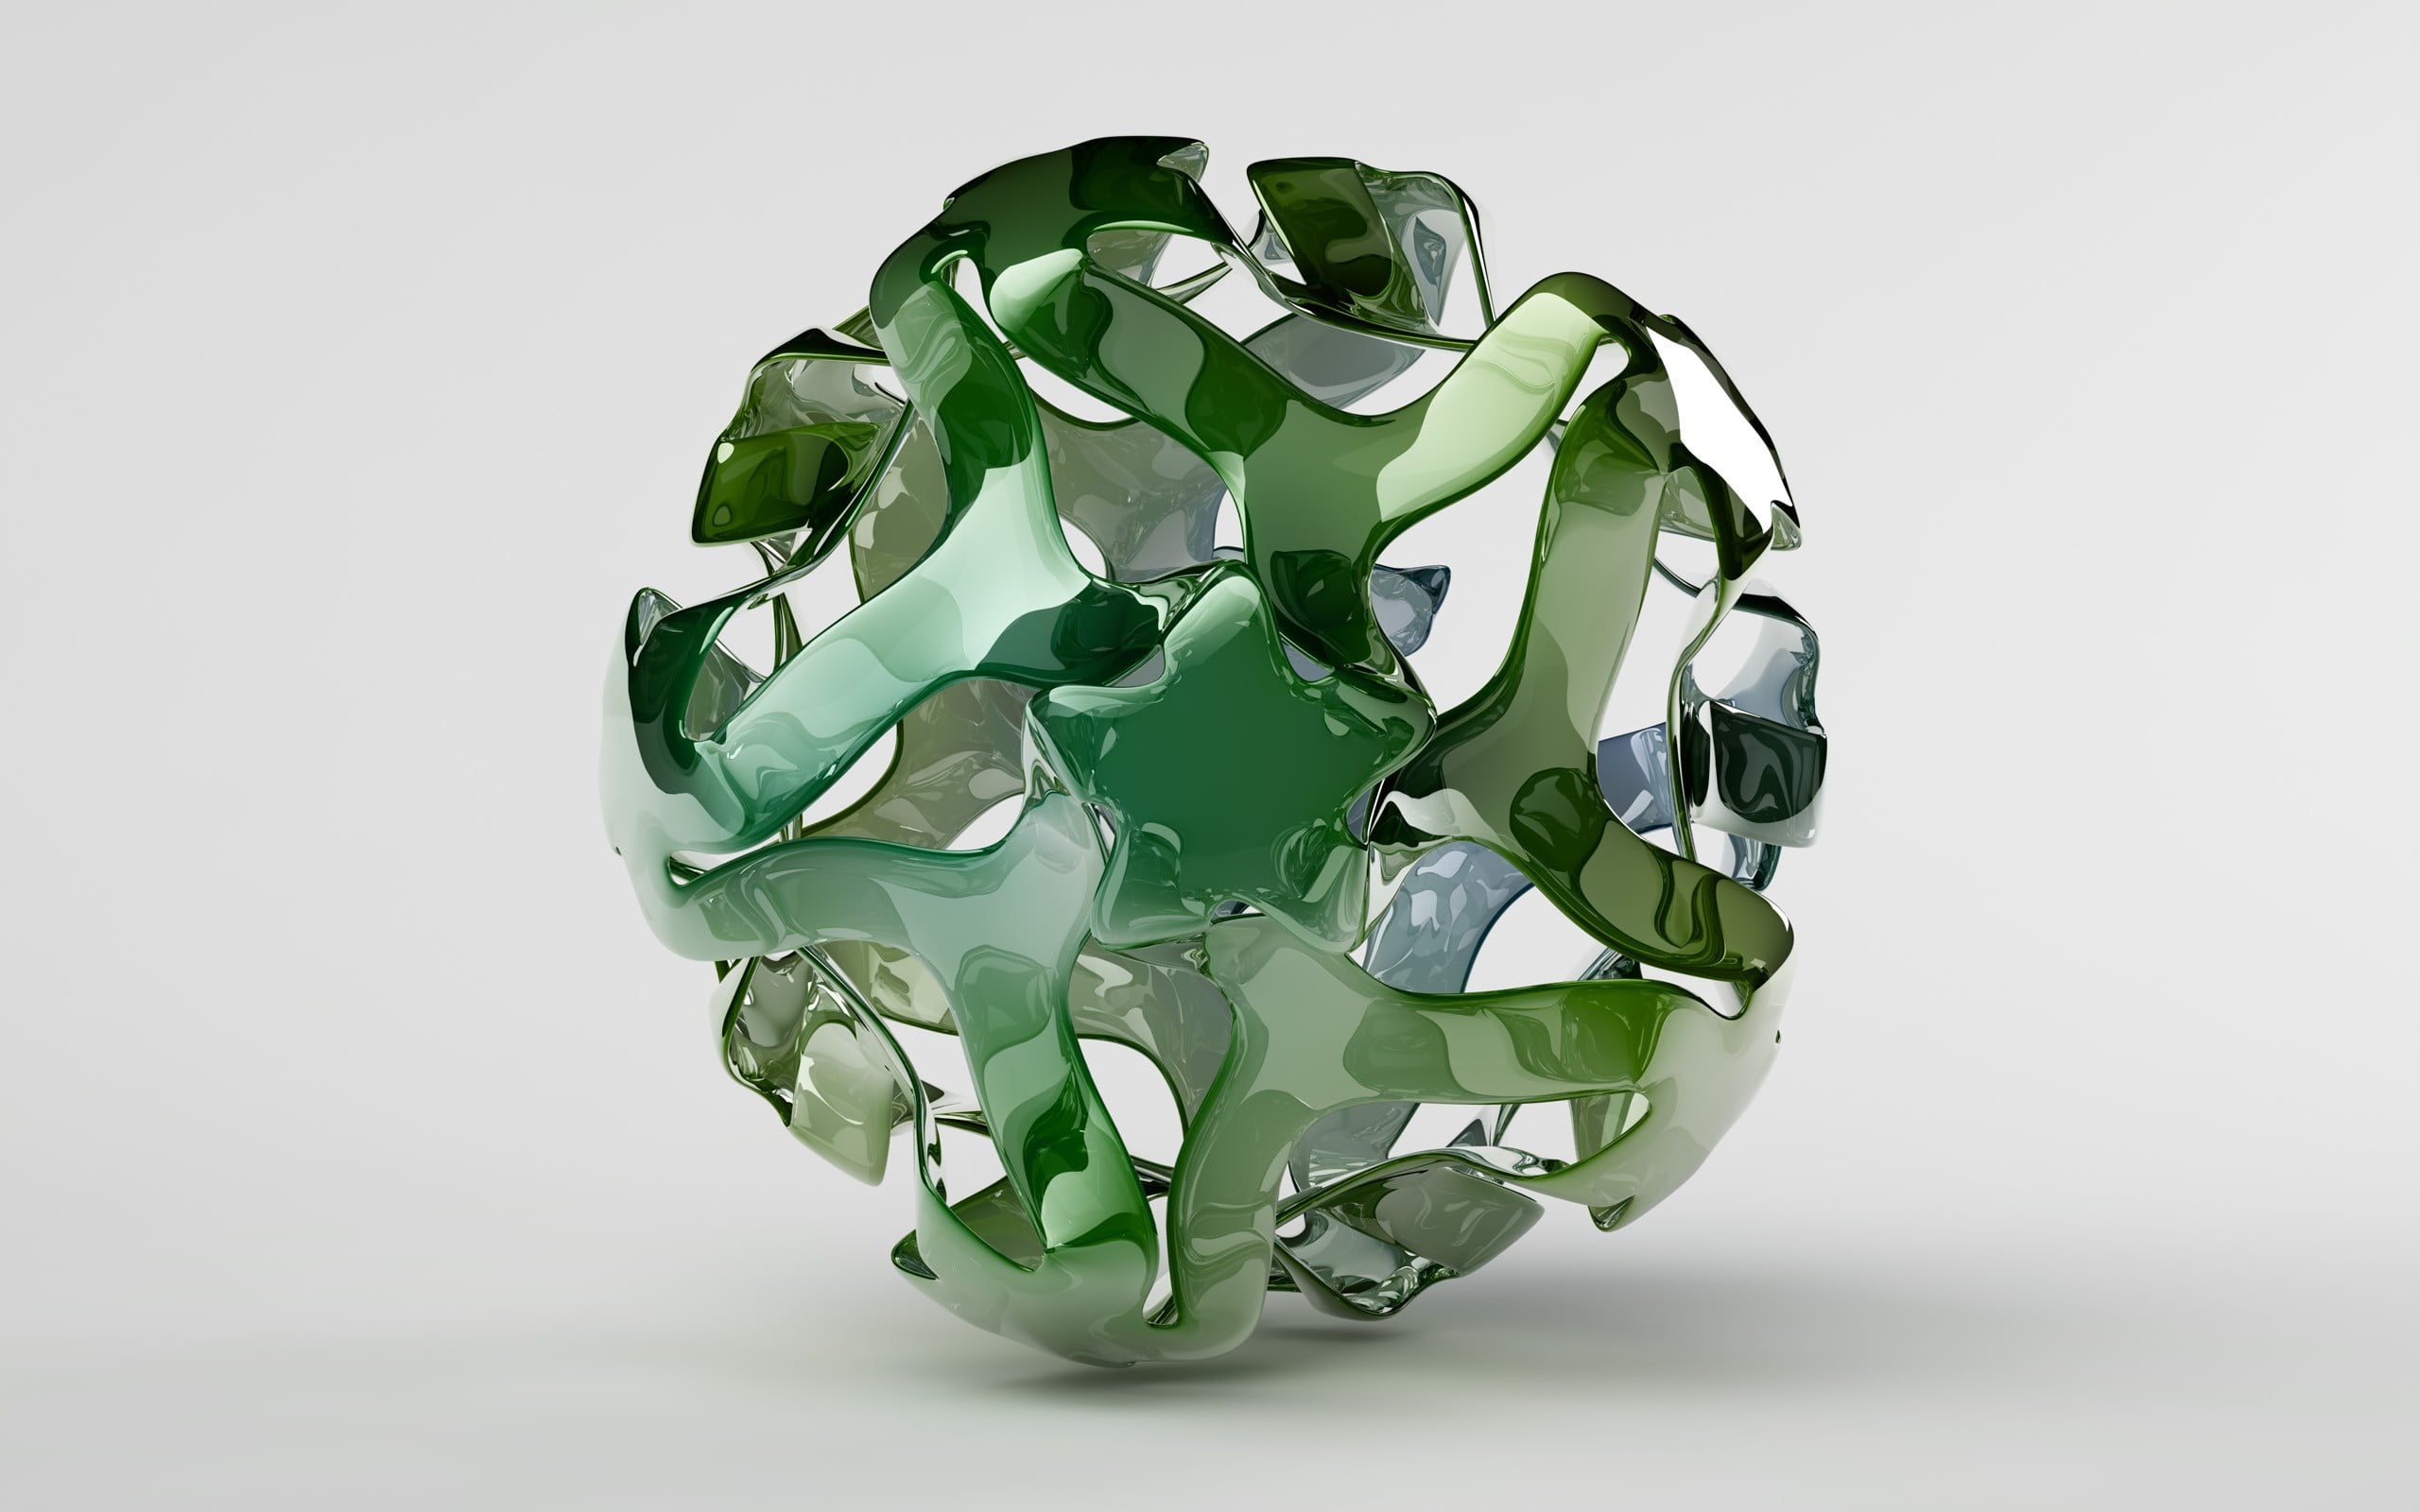 green and white glass ball decor, CGI, minimalism, abstract, sphere